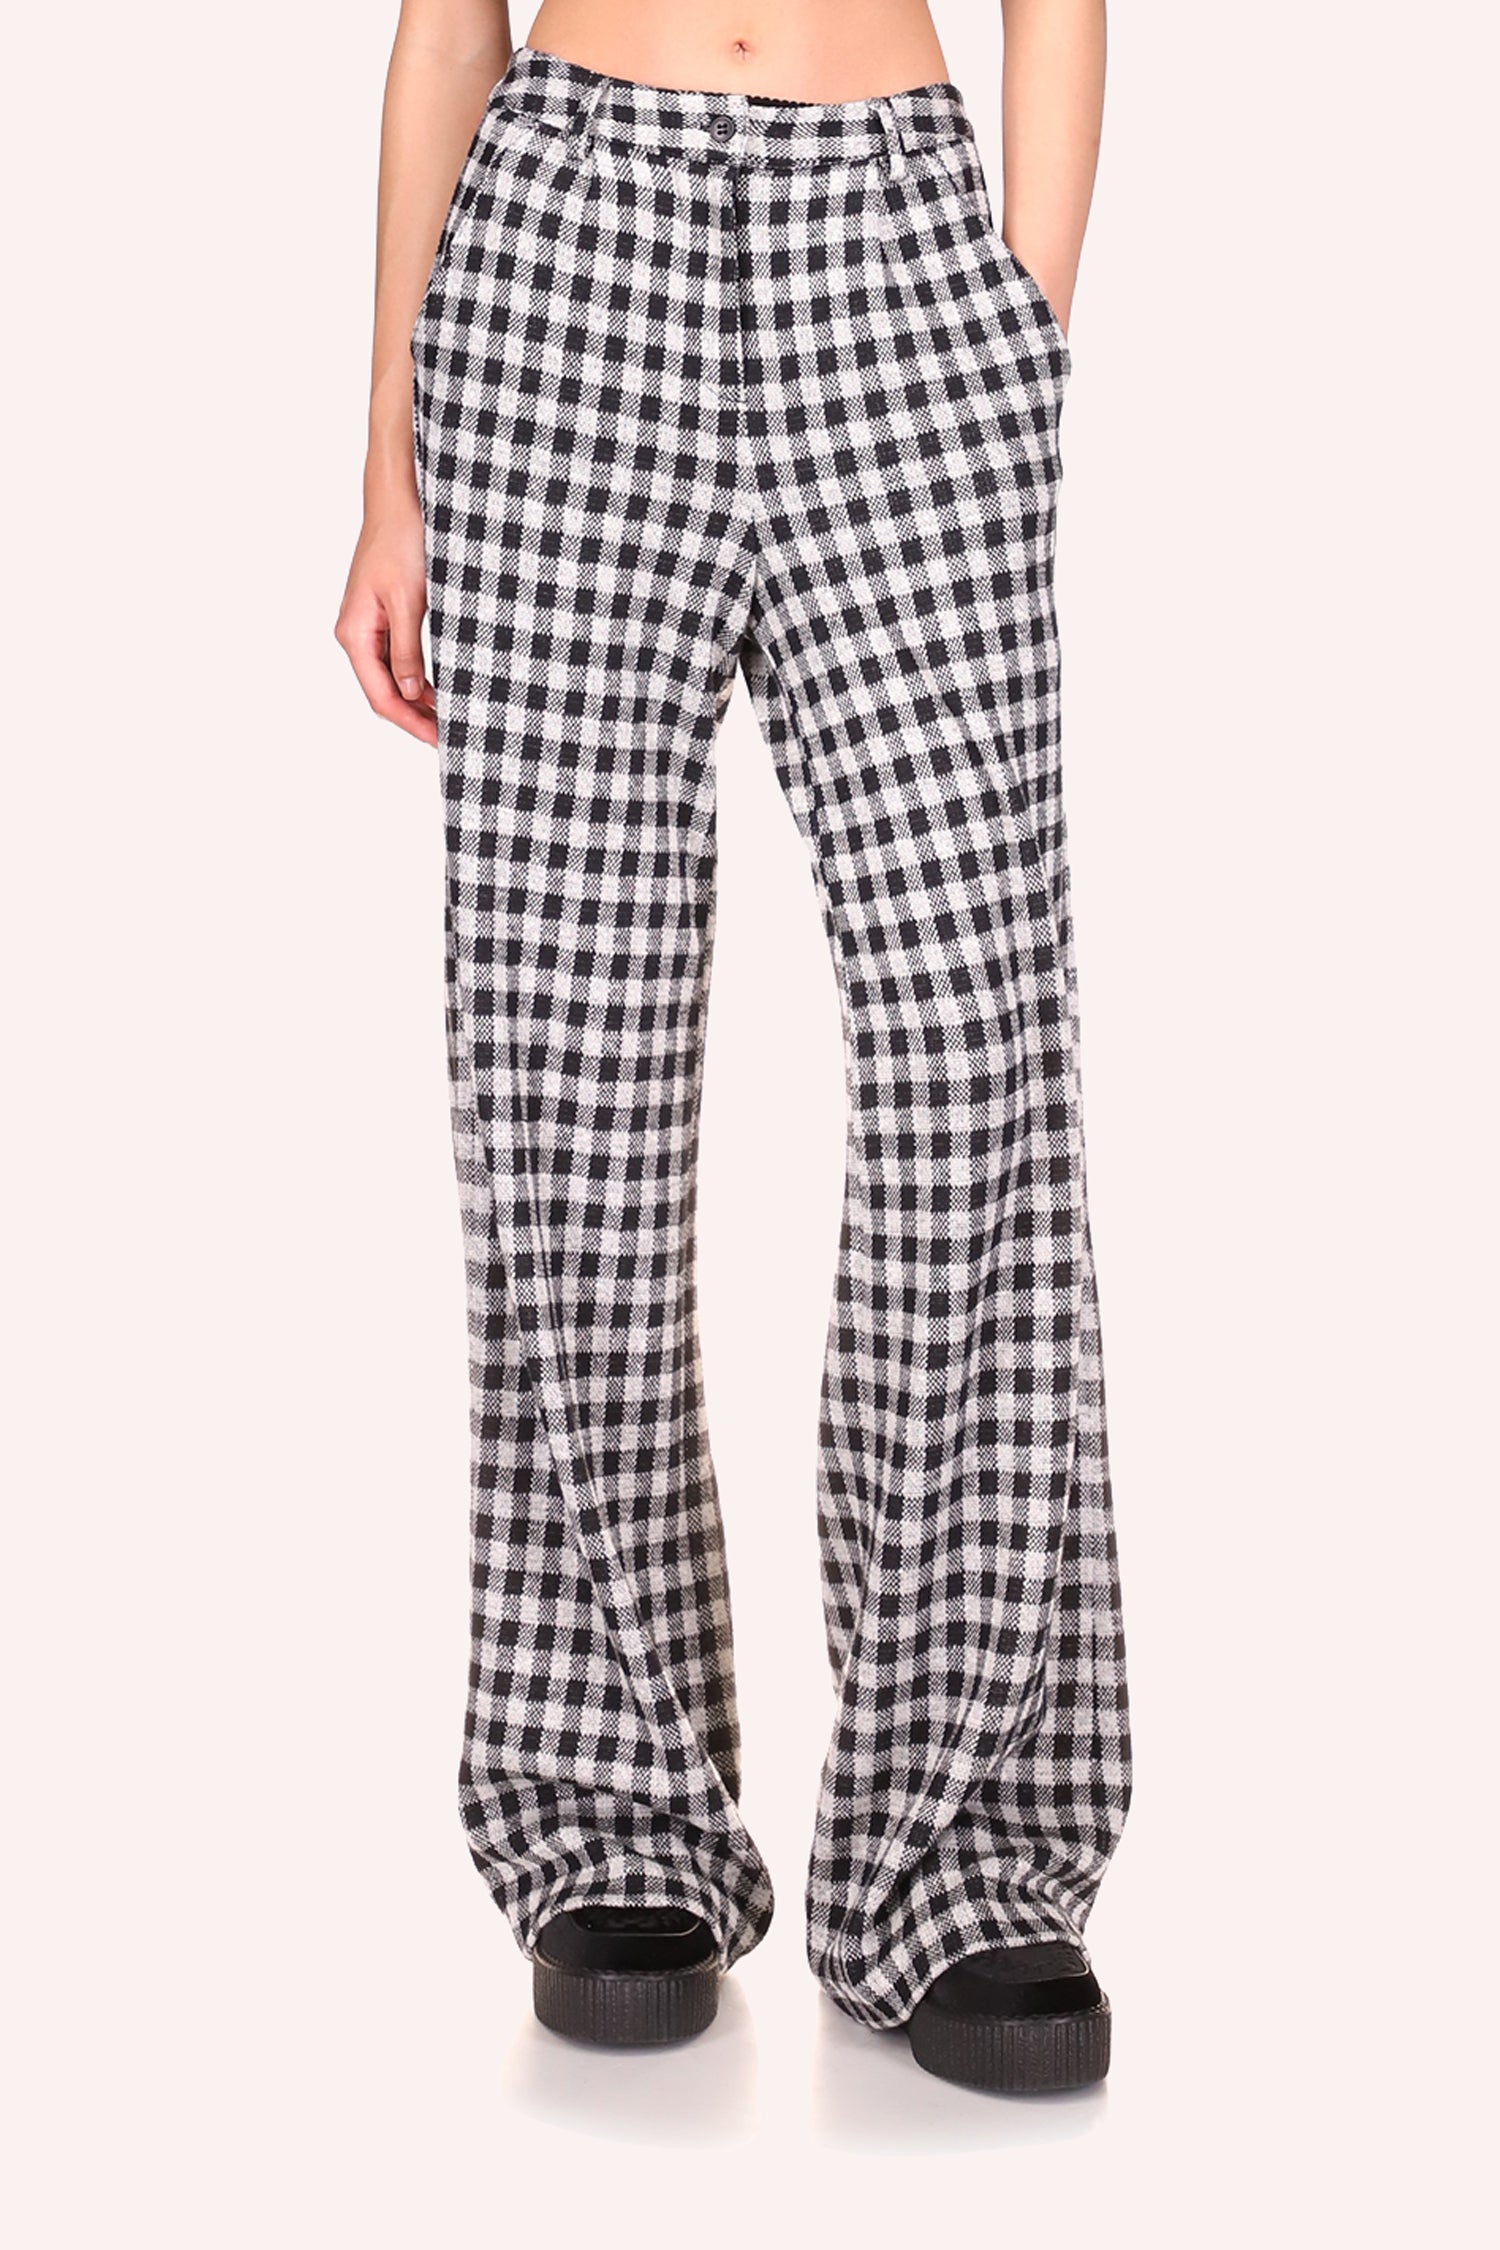 Gingham Pants Black Checkered pattern in B&W, long on legs cover the shoes, 1 button to close